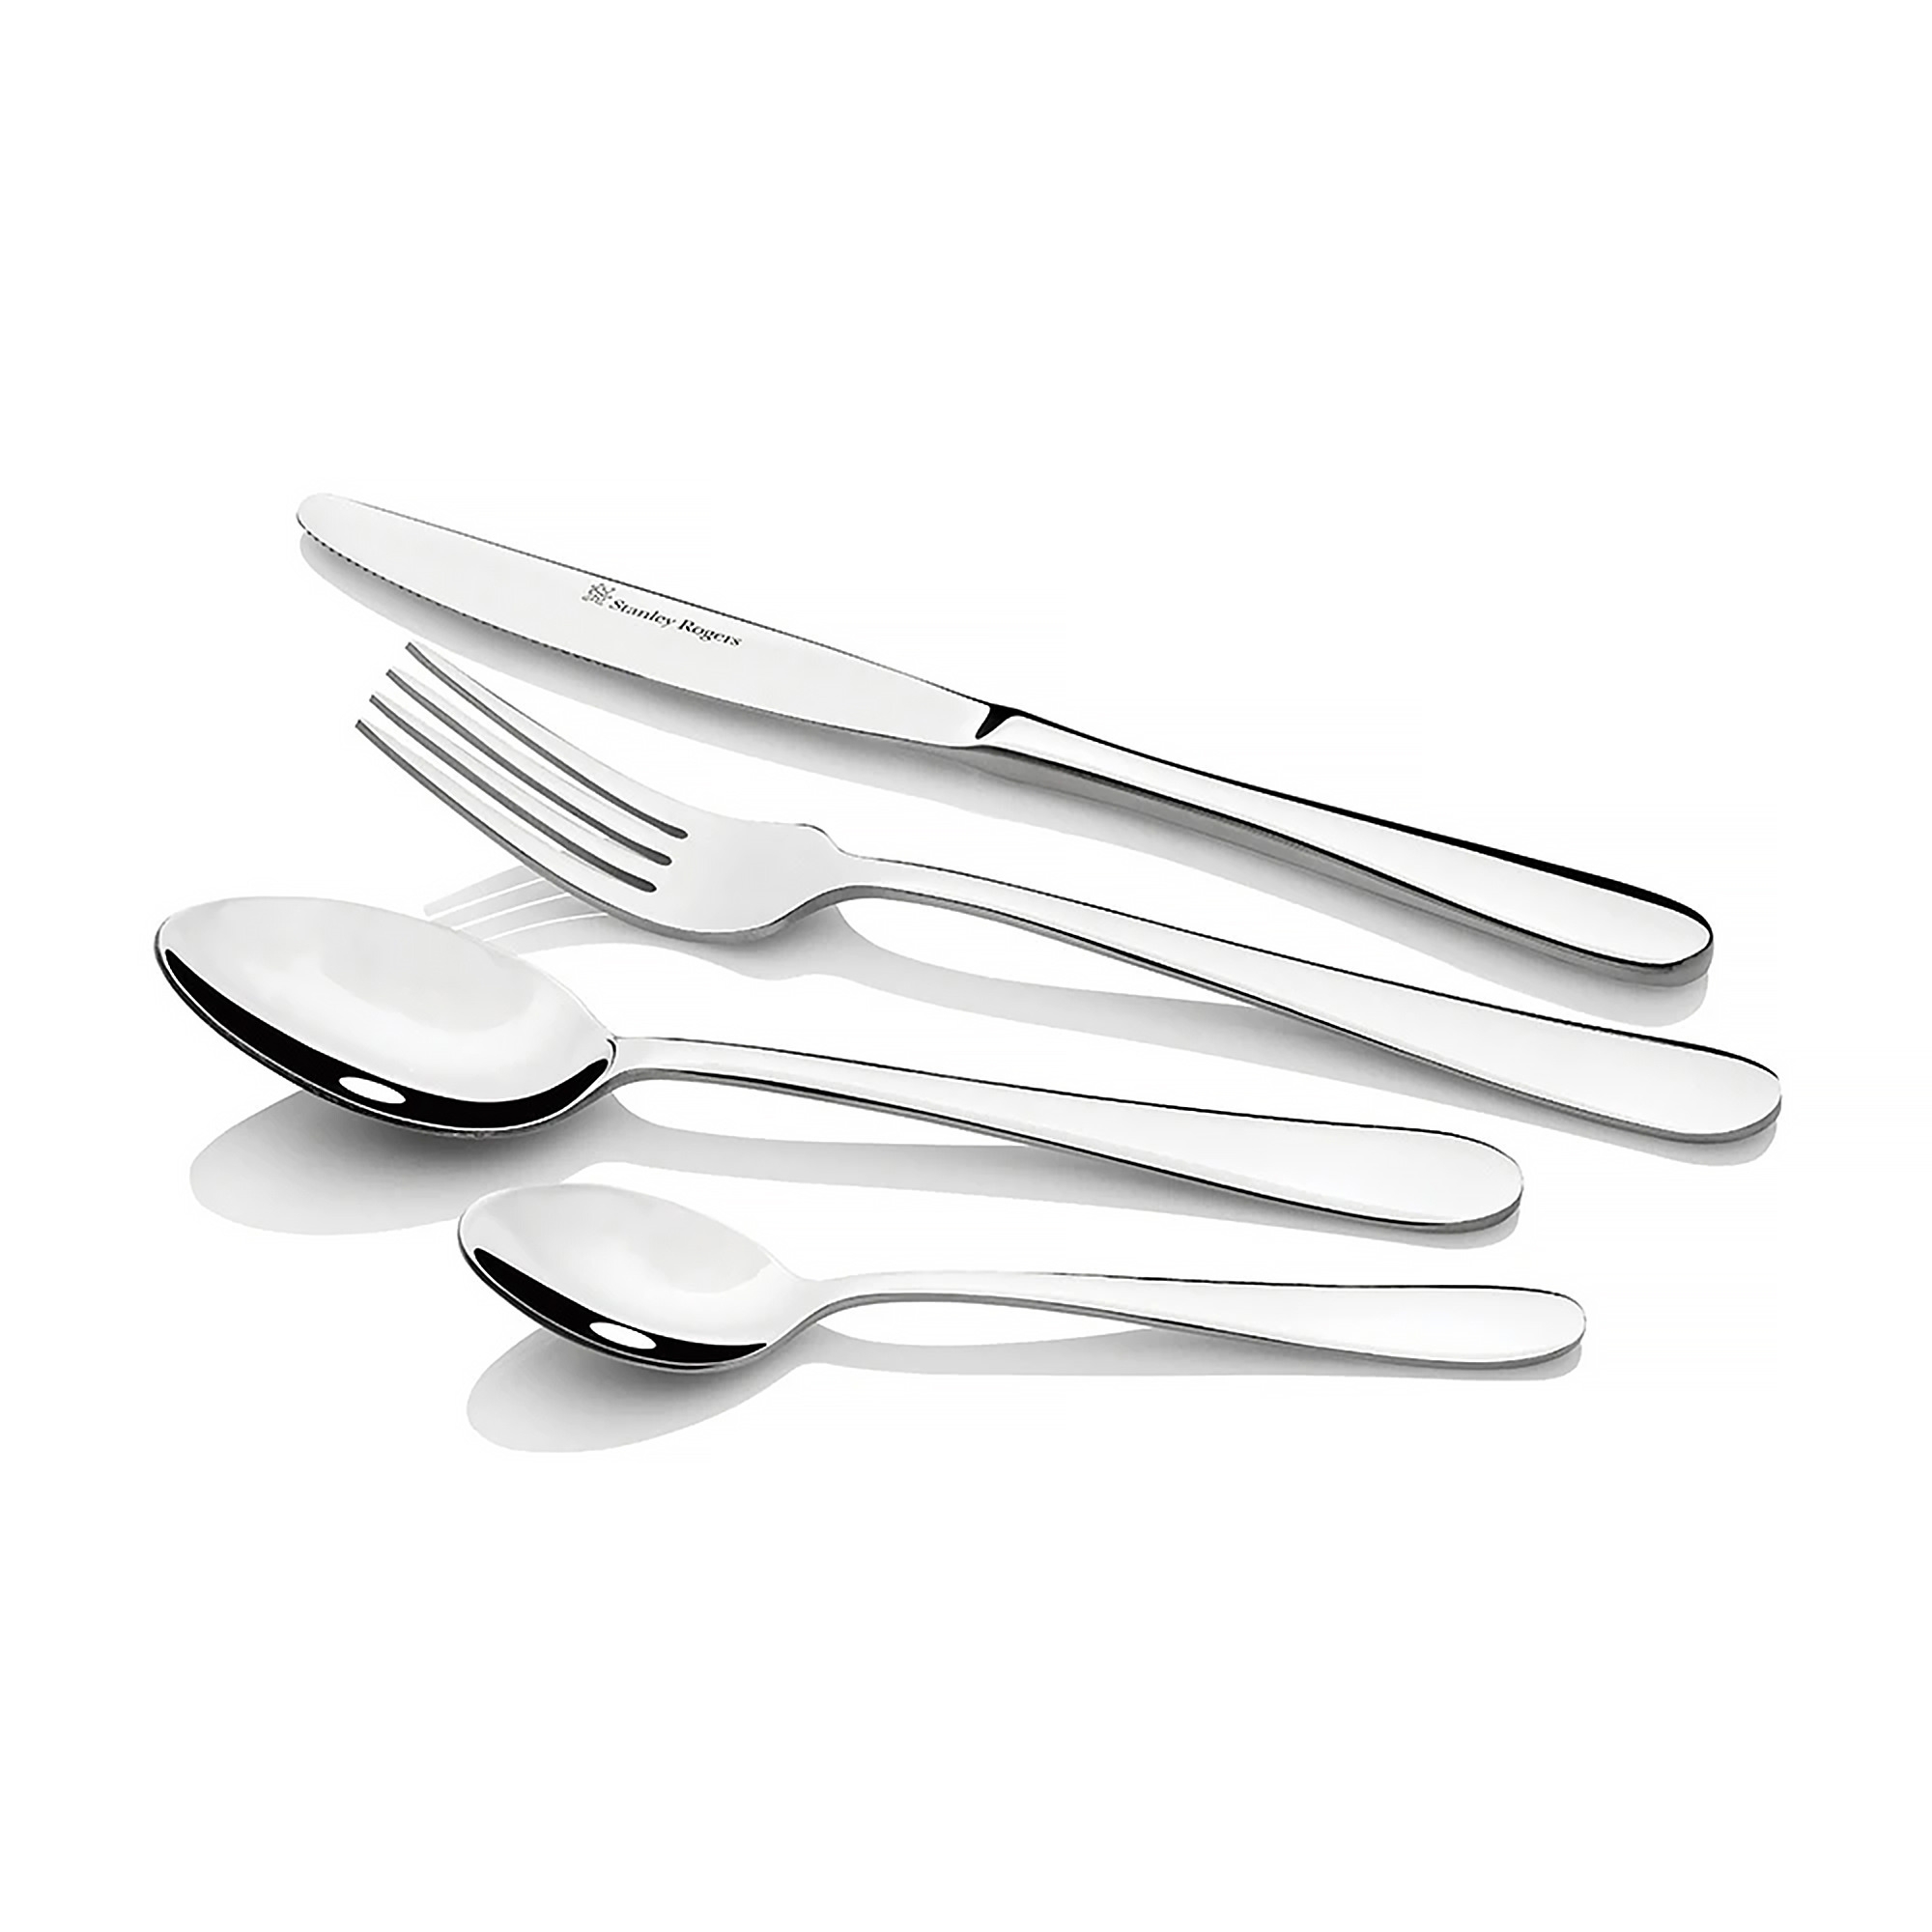 Stanley Rogers Albany Cutlery Set 84pc Image 2